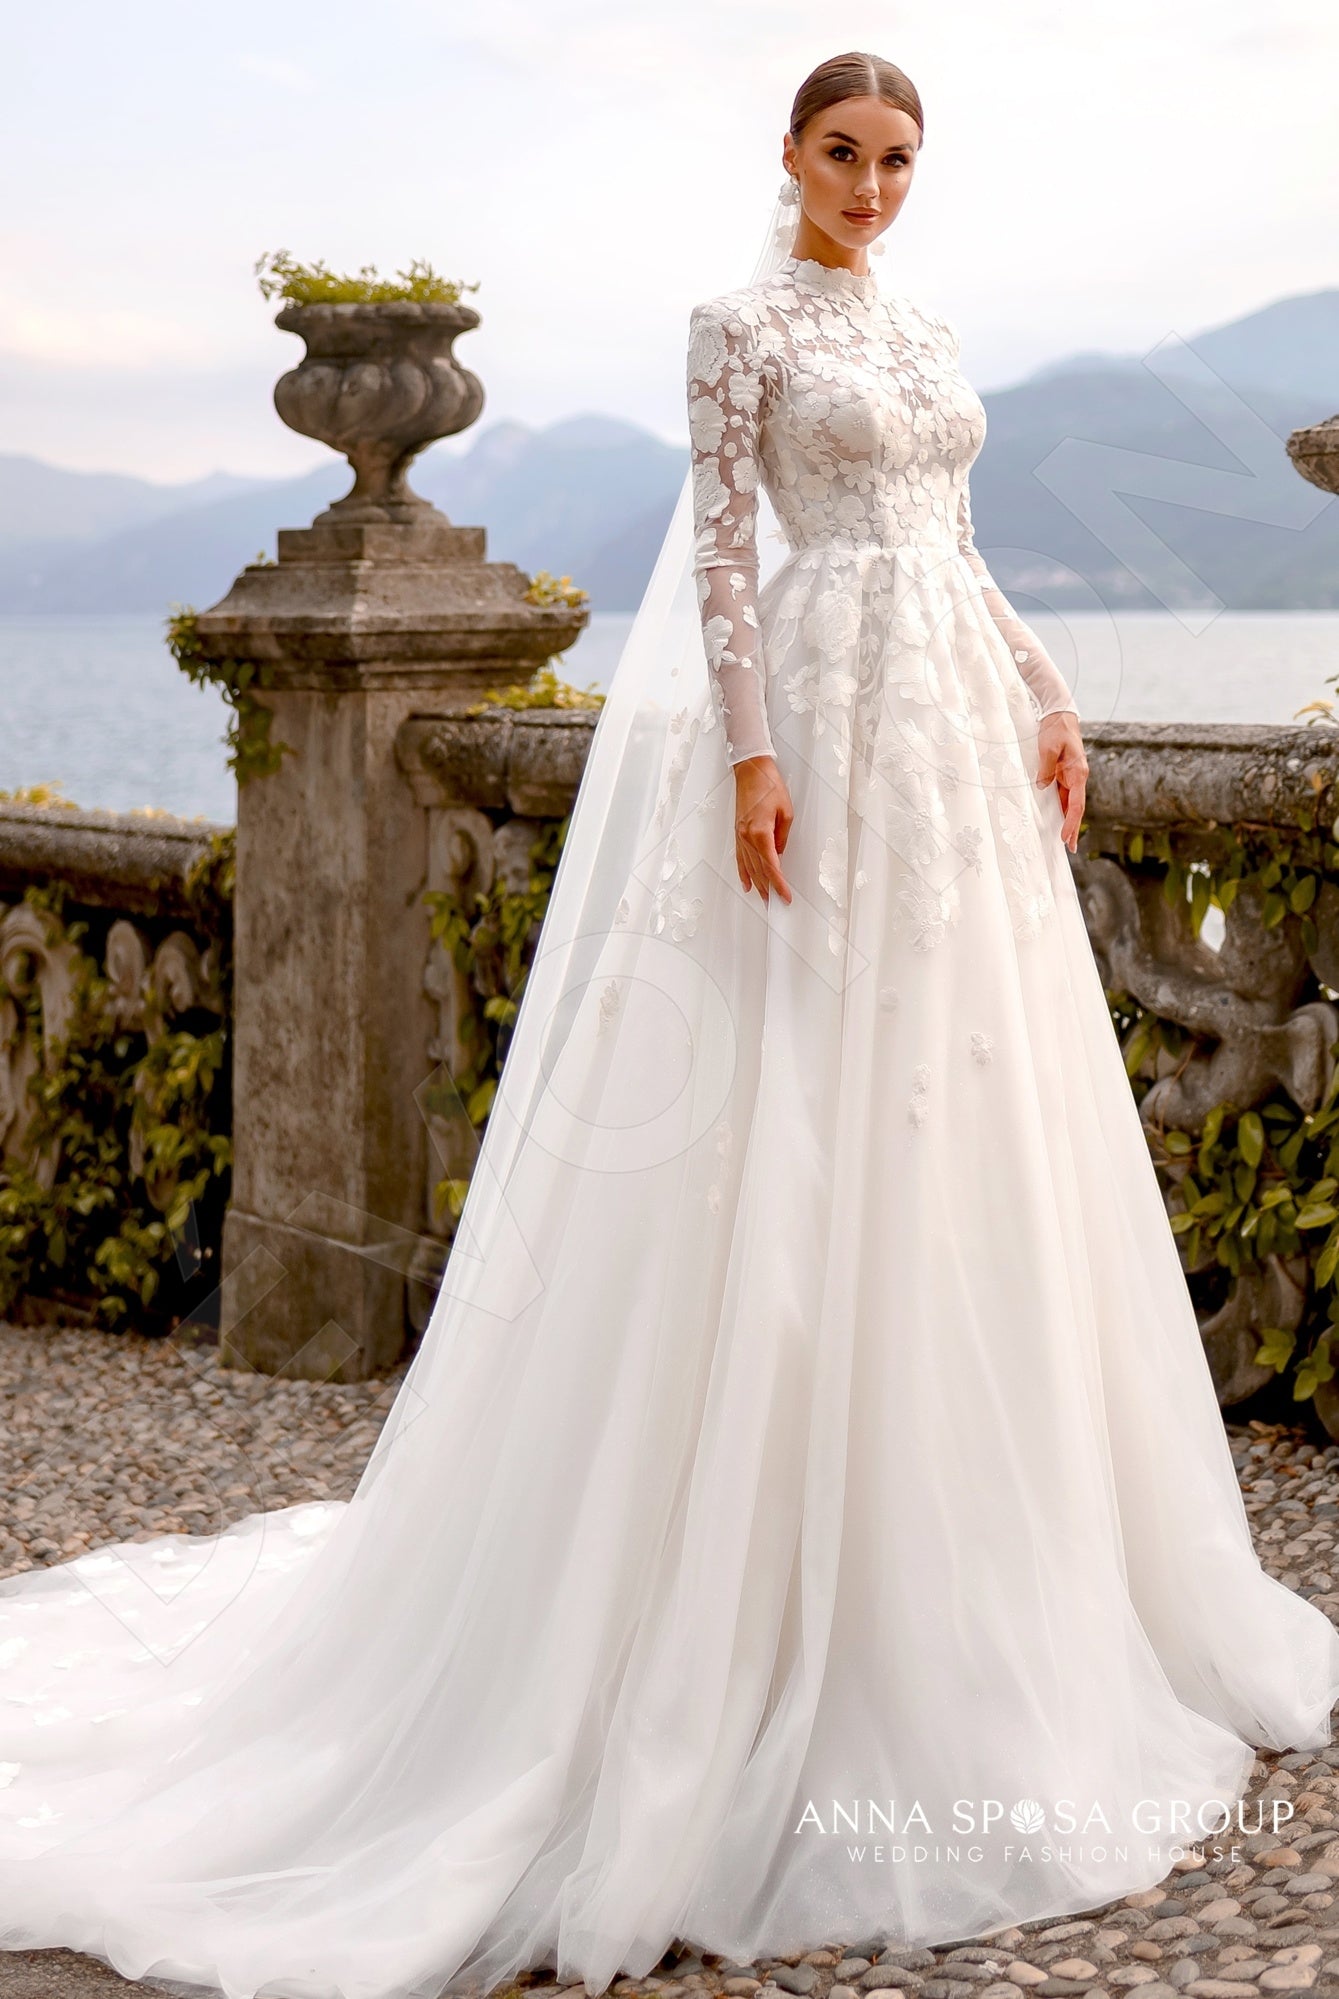 Simple two pieces wedding dress composed by a lace bridal bodysuit with  long sleeves and a satin skirt with pockets